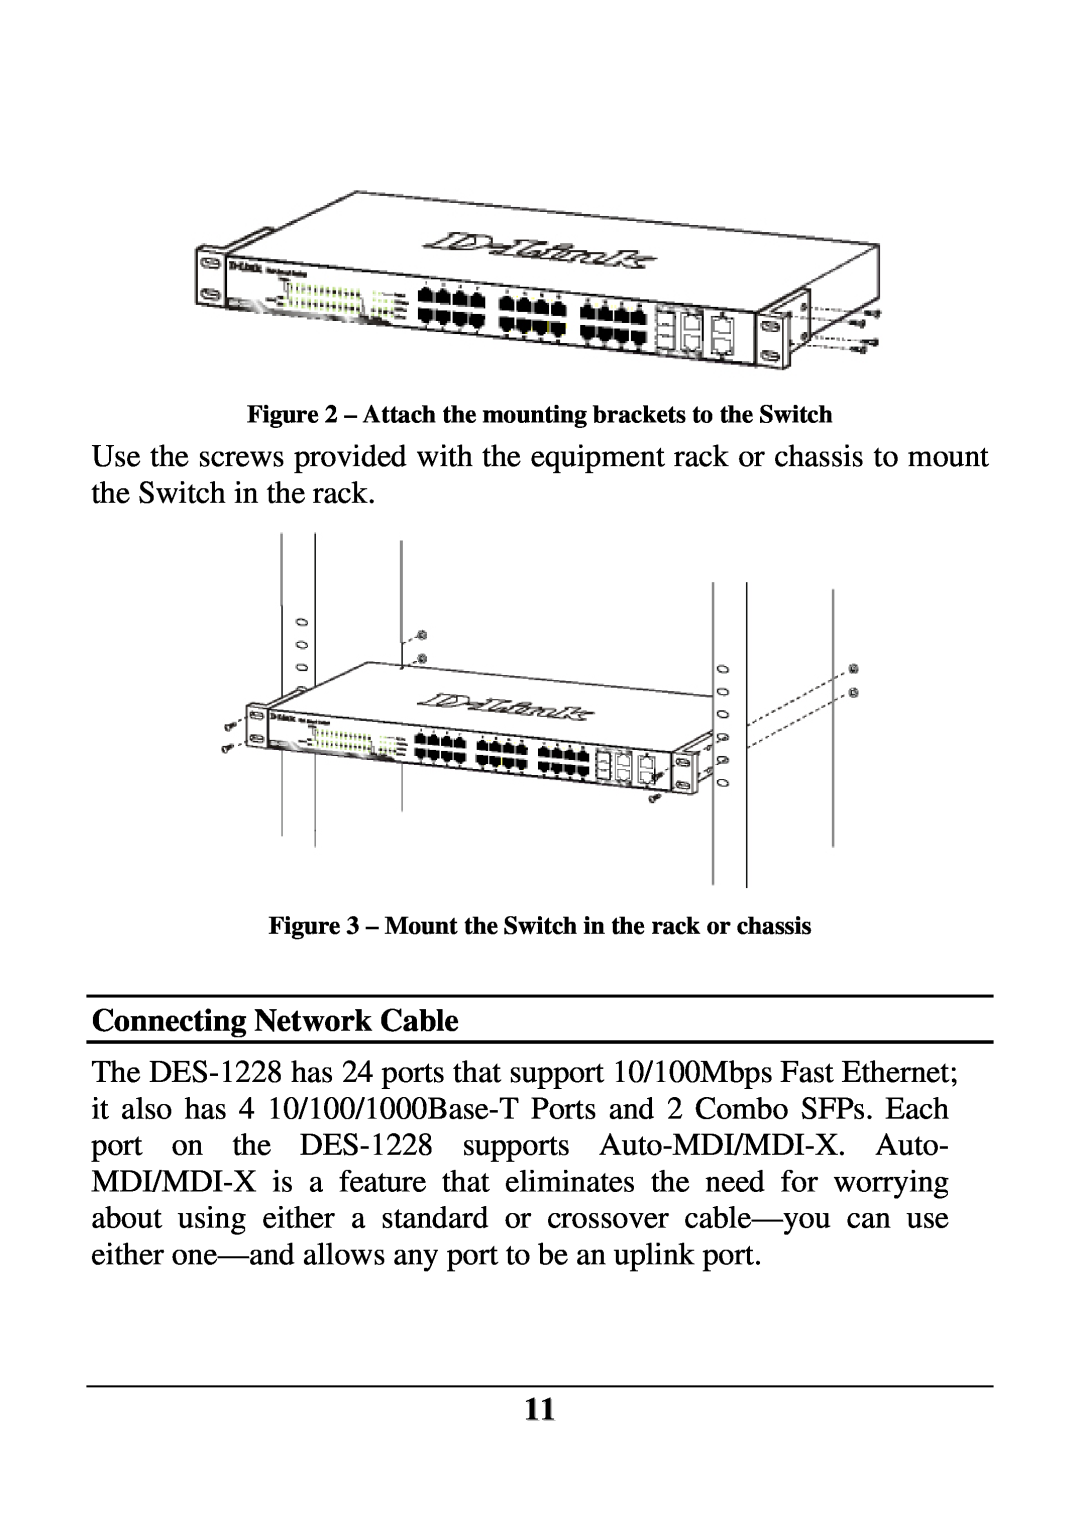 D-Link DES-1228 user manual Connecting Network Cable, Attach the mounting brackets to the Switch 